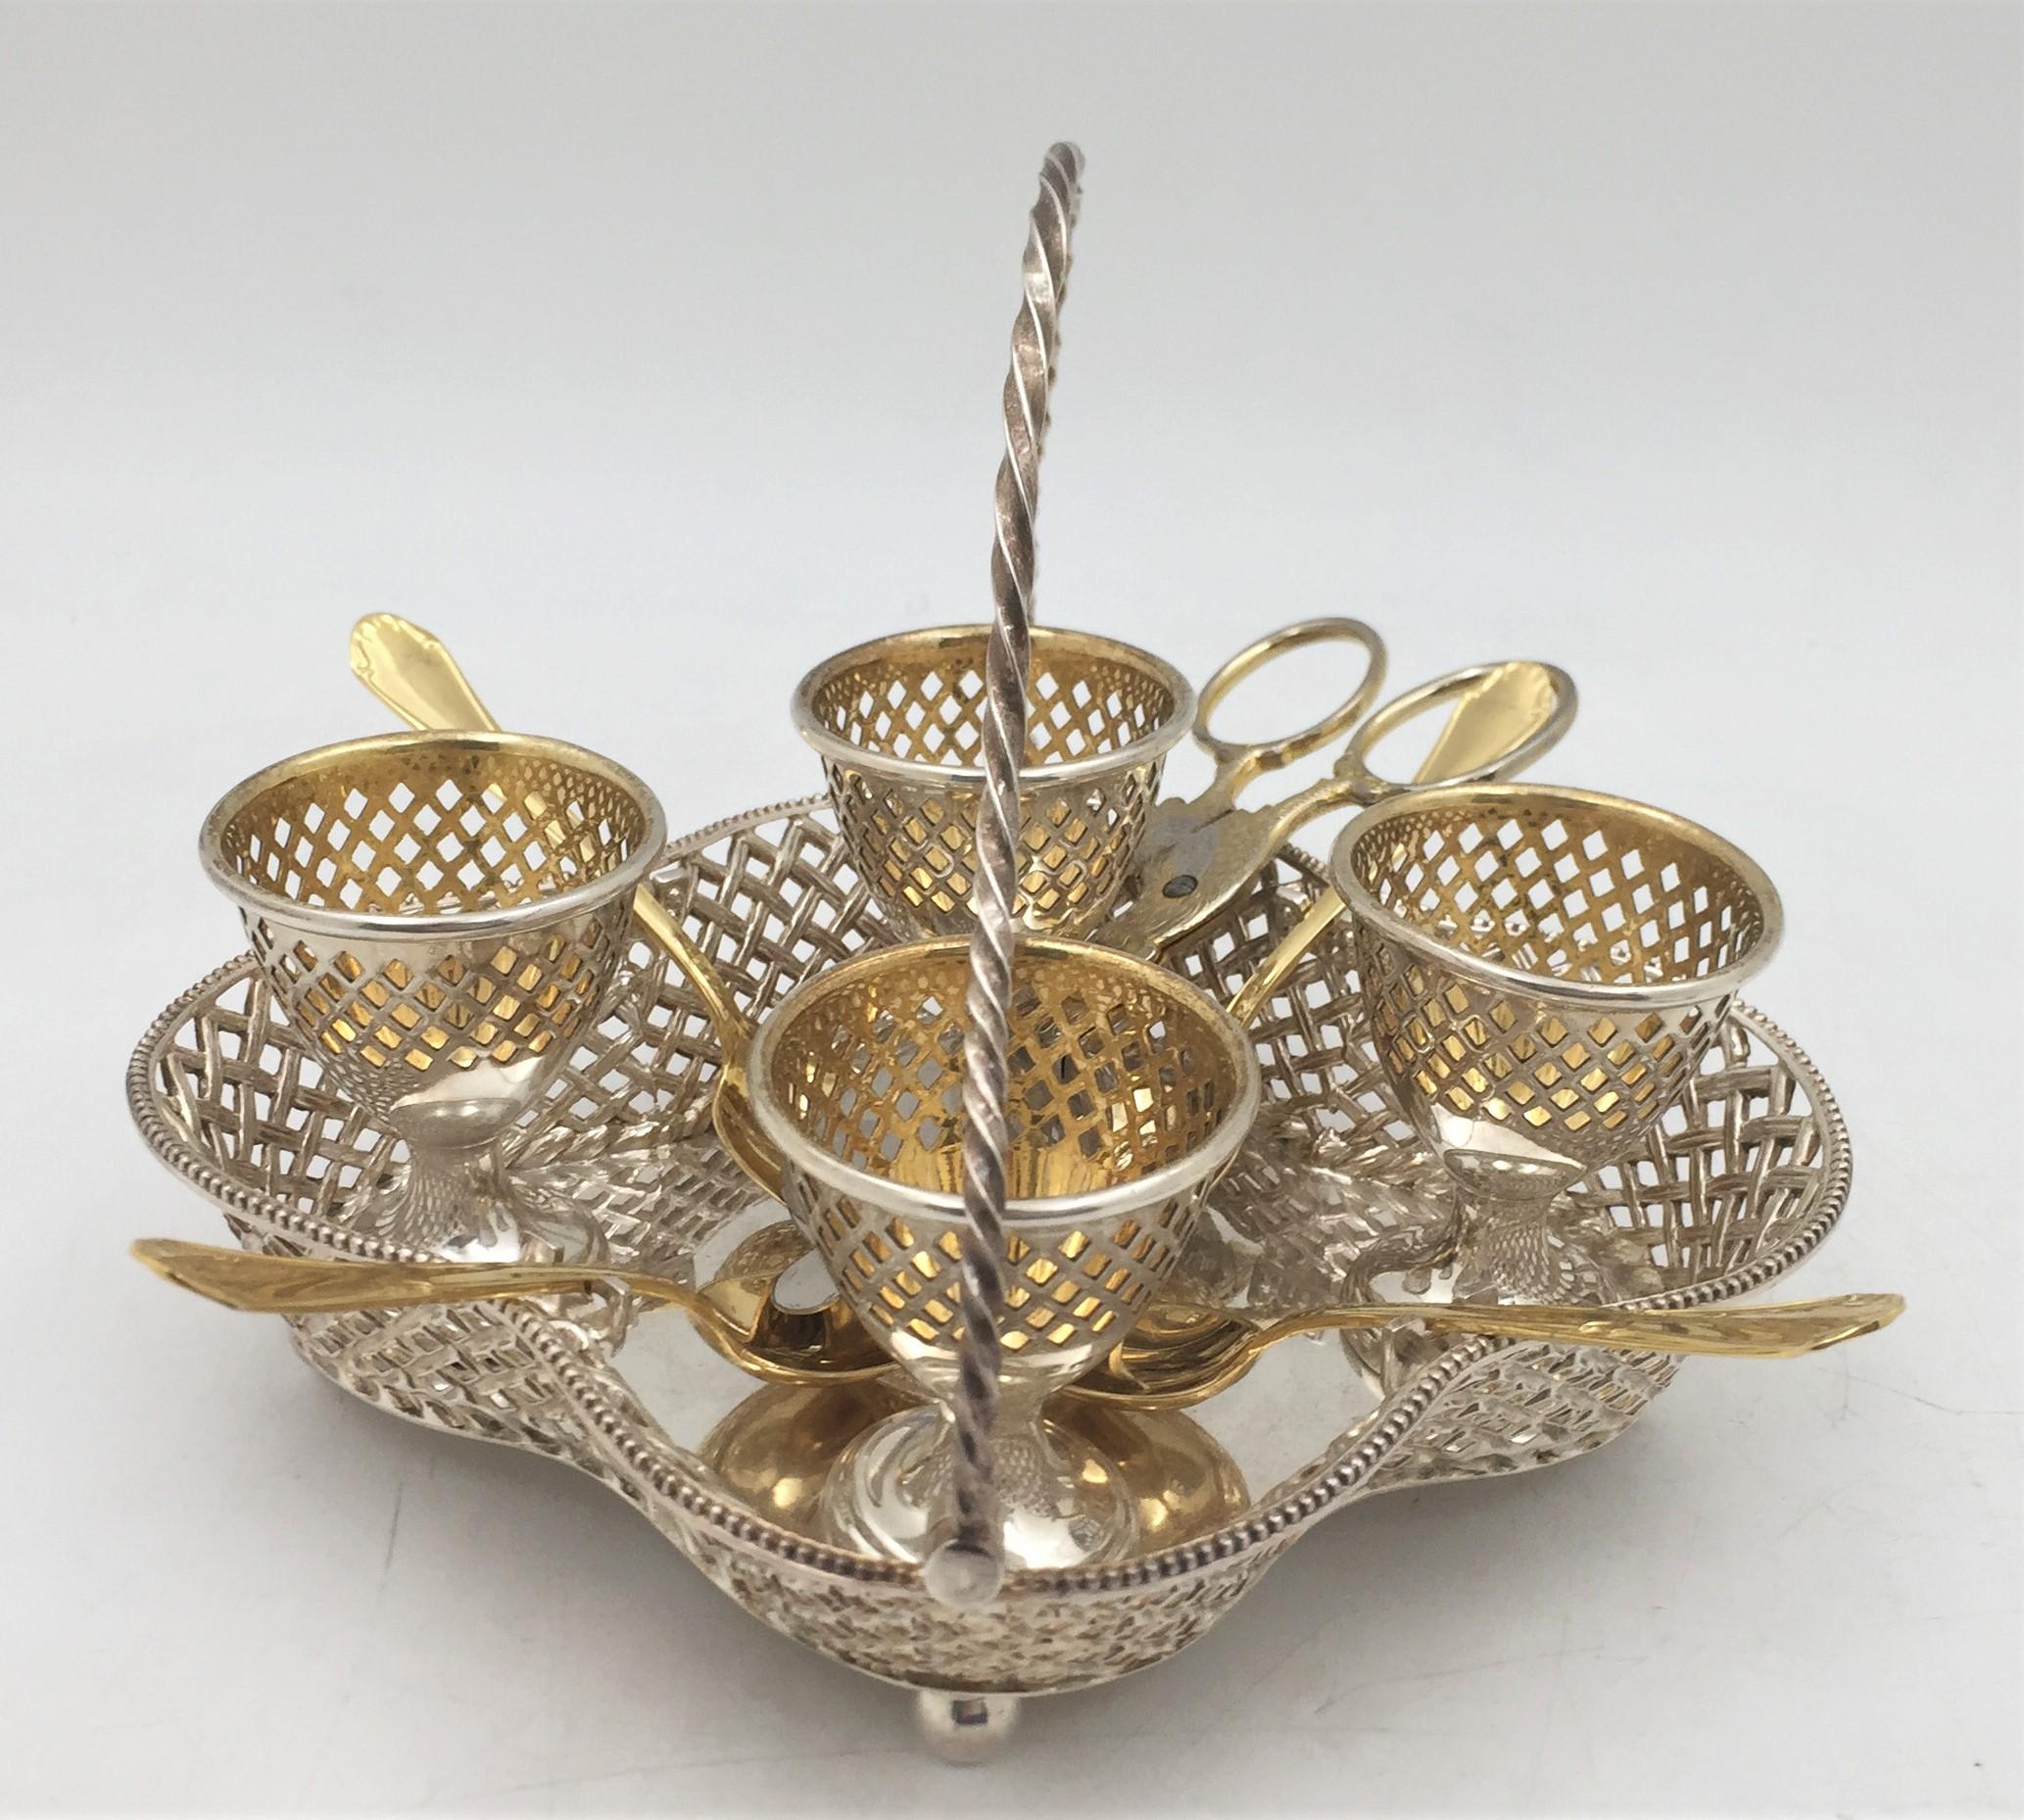 Wilkinson & Co., sterling silver egg coddler stand holder in Victorian style from 1880 with 4 sterling silver egg holders. It is accompanied by 4 gilt sterling silver spoons and an egg server that exhibits a refined chicken motif. The pierced egg